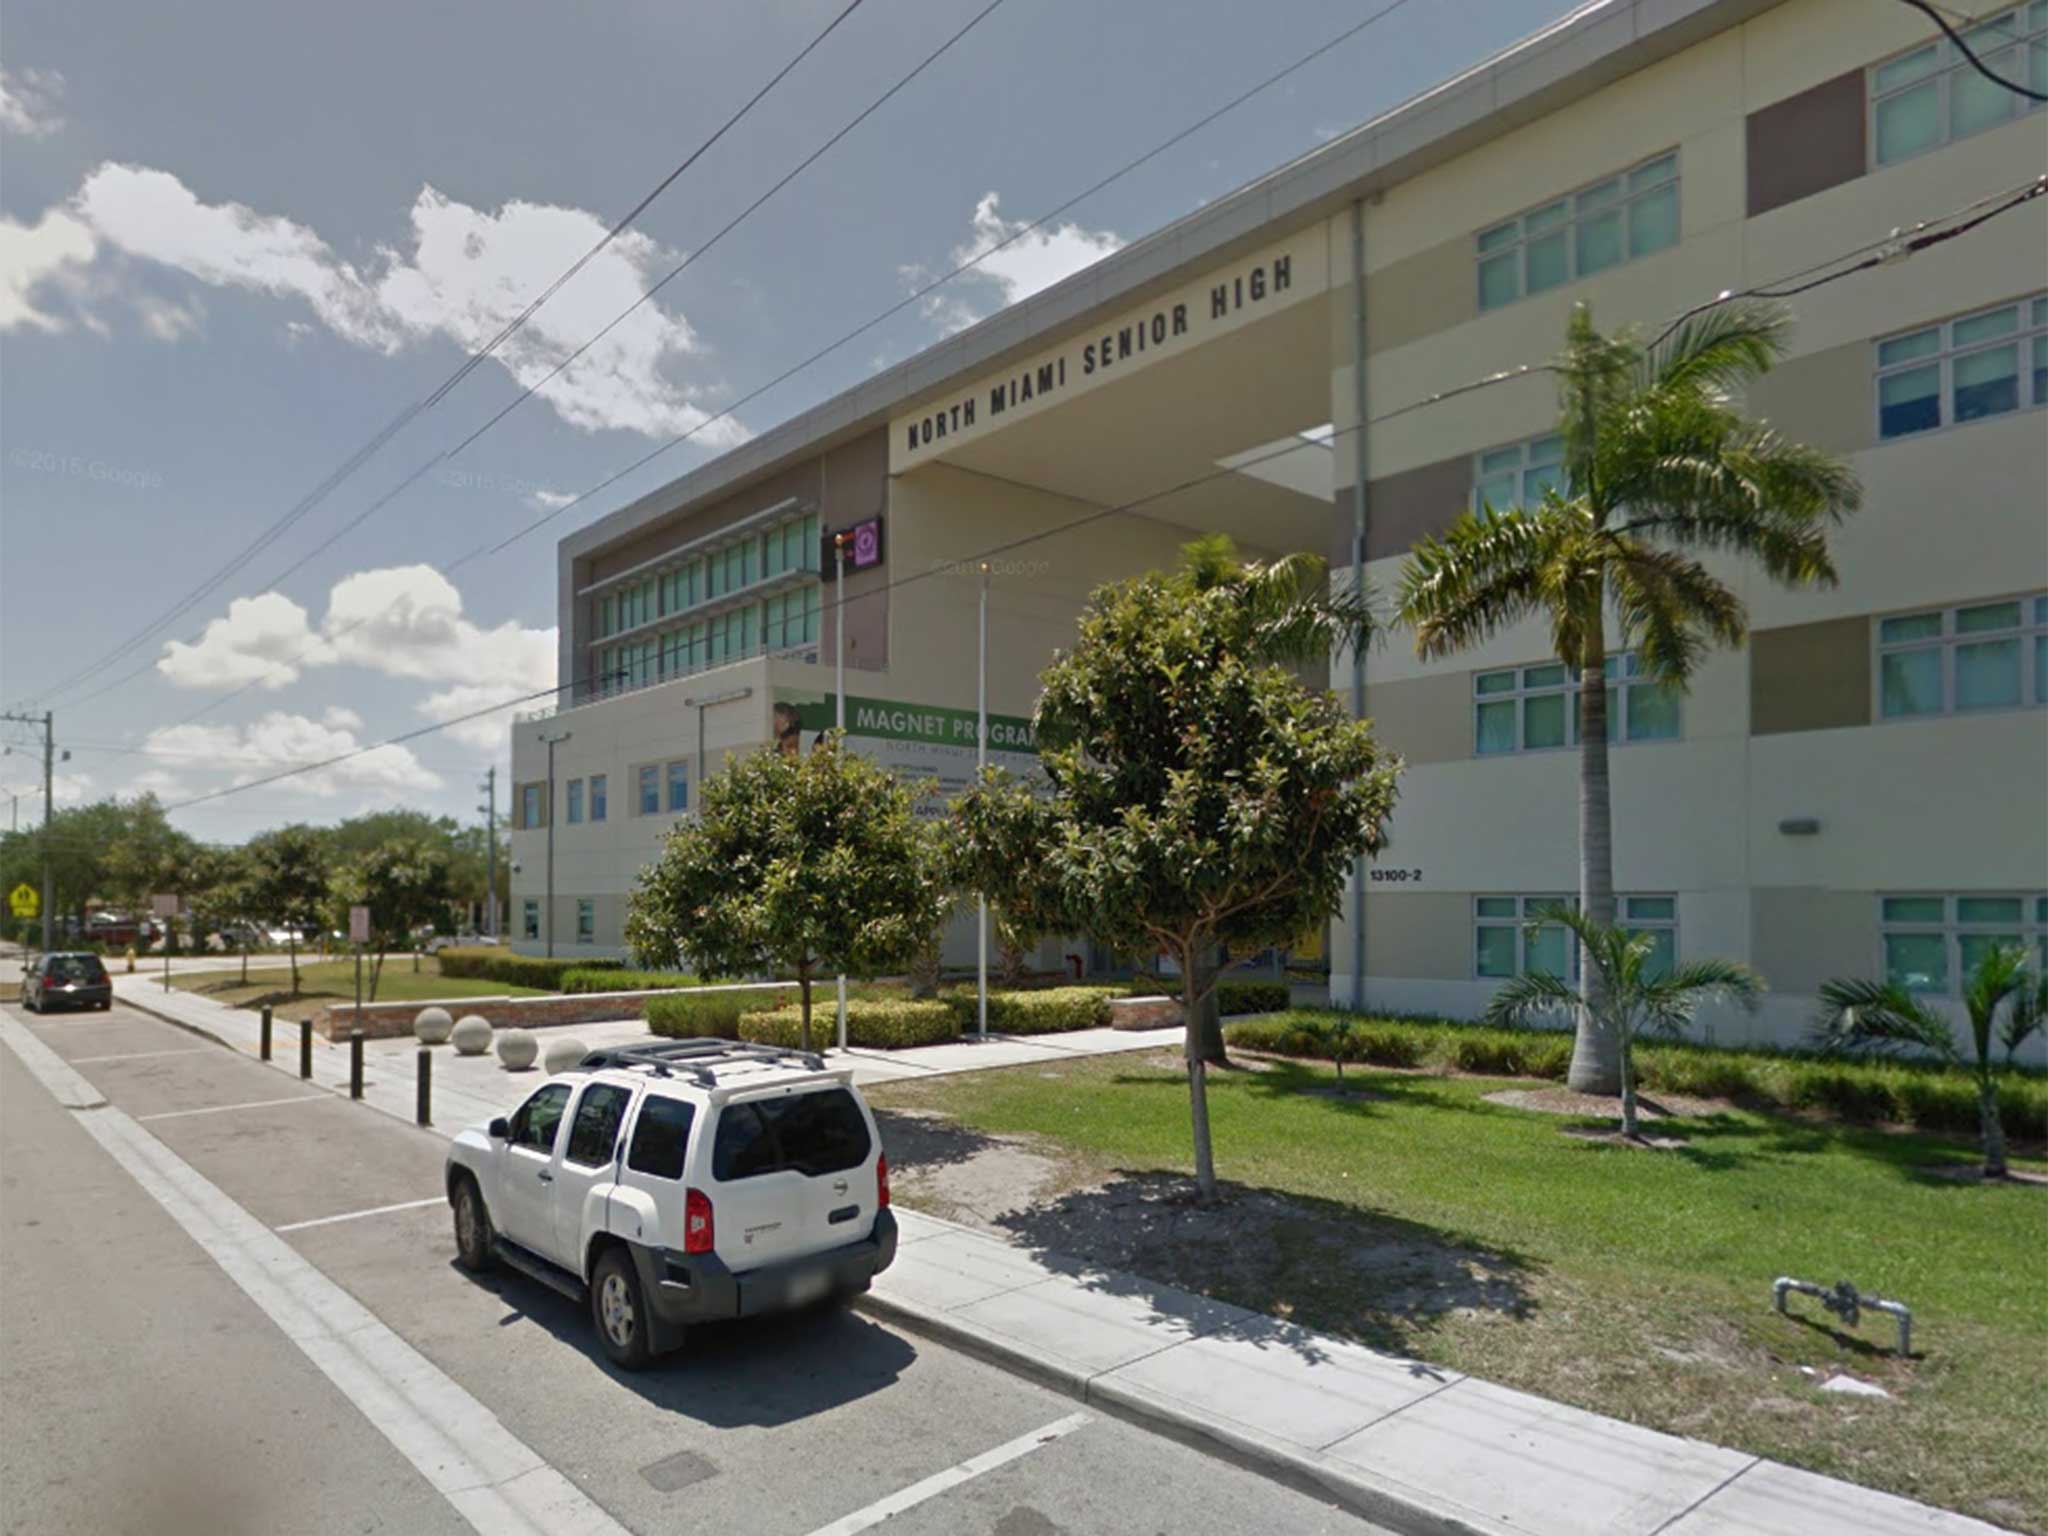 The pupils attended North Miami Senior High